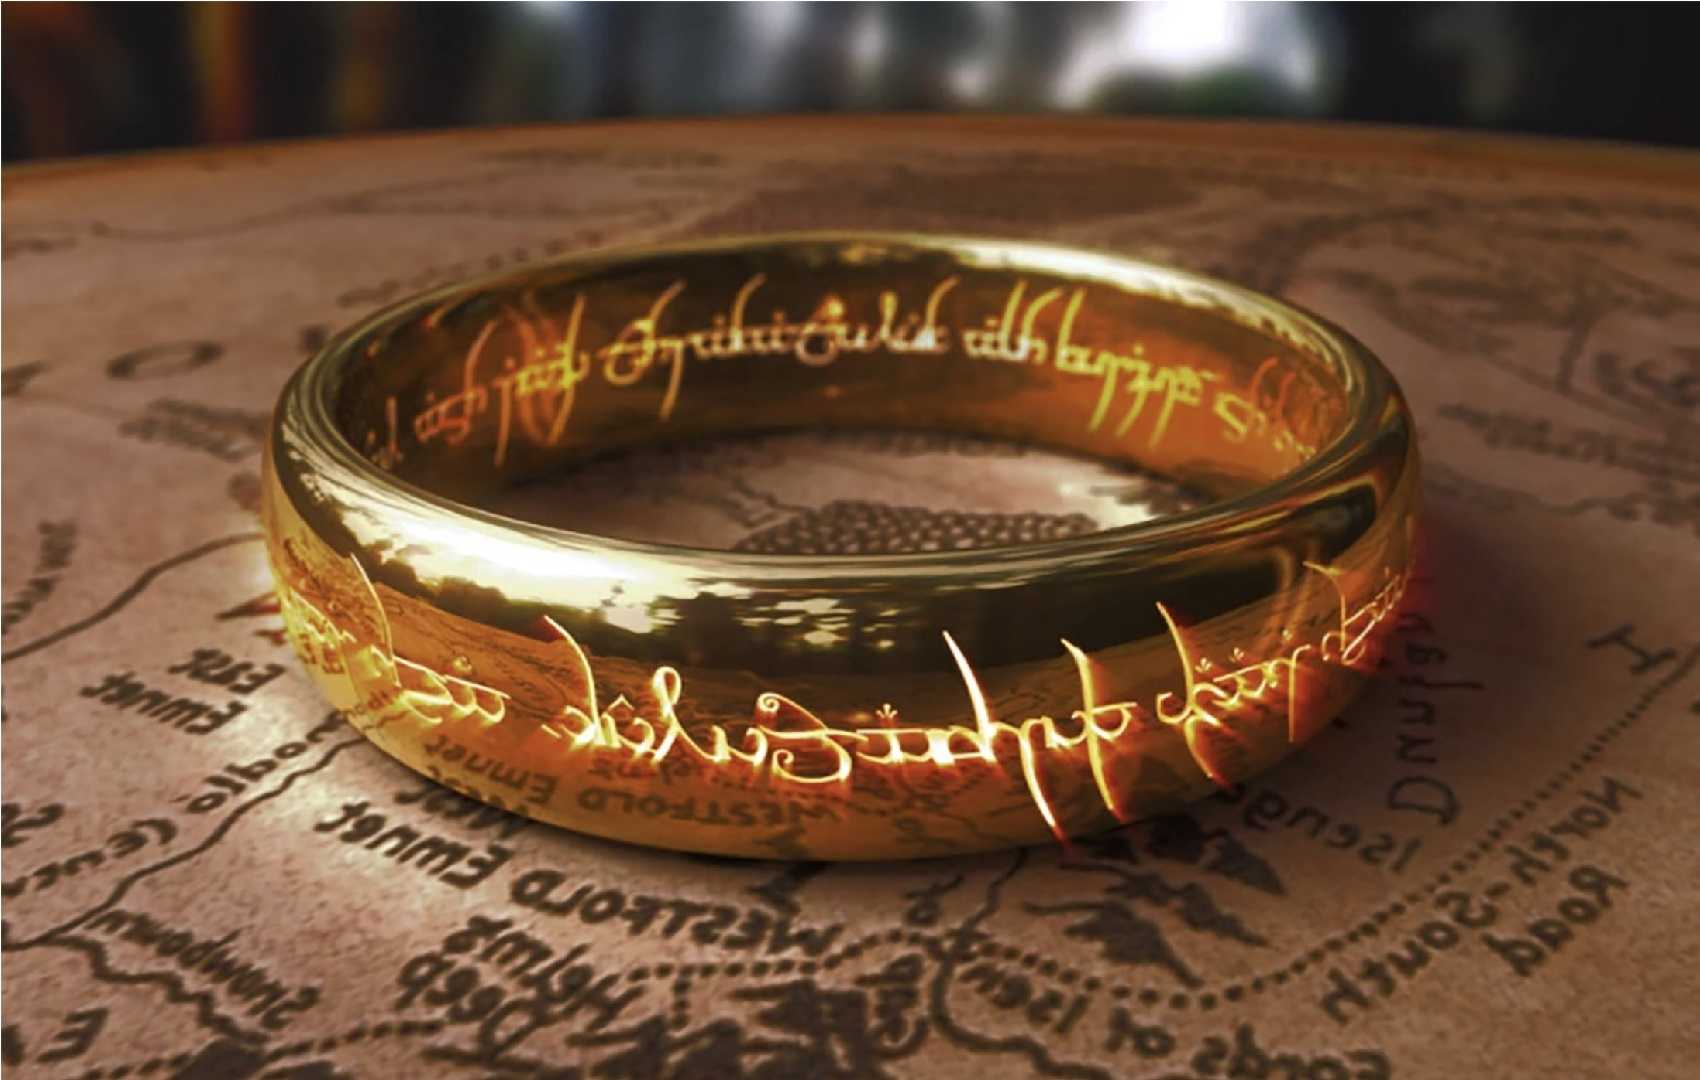 The Lord of the Rings Wallpaper - Wallpaper Sun